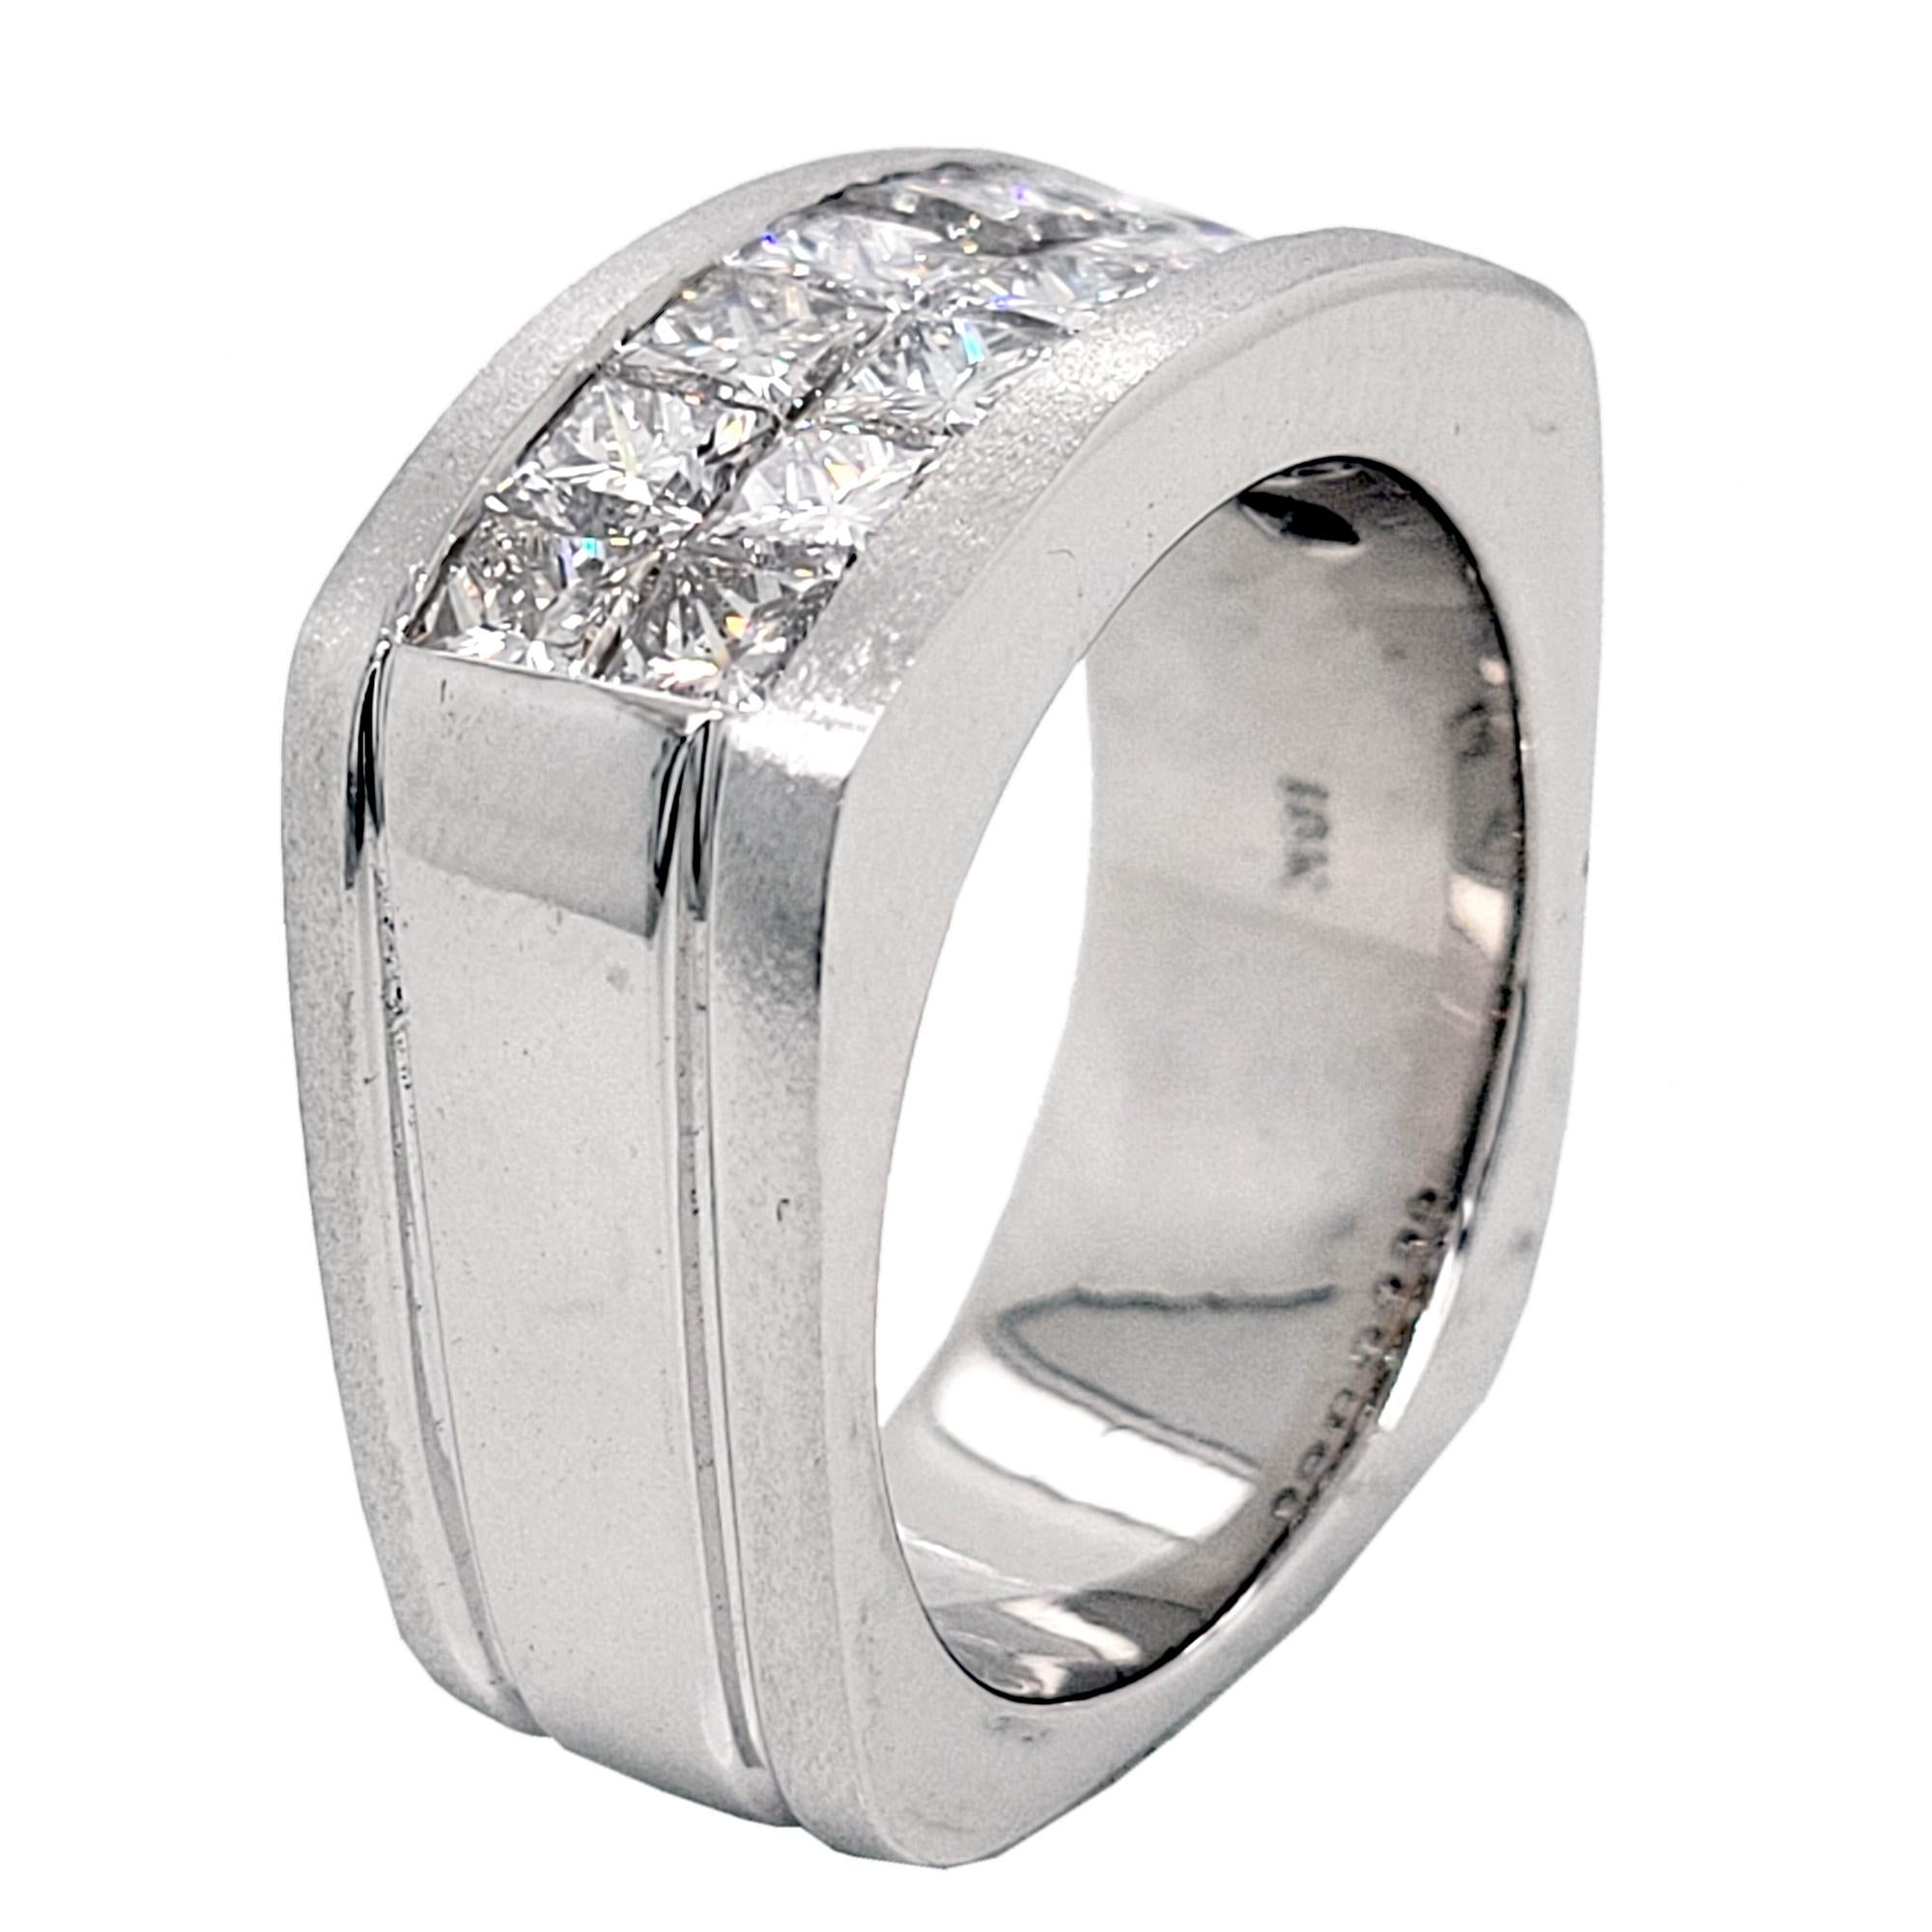 3.51 Carat Princess Cut Diamond 18 Karat Gents Ring In New Condition For Sale In Los Angeles, CA